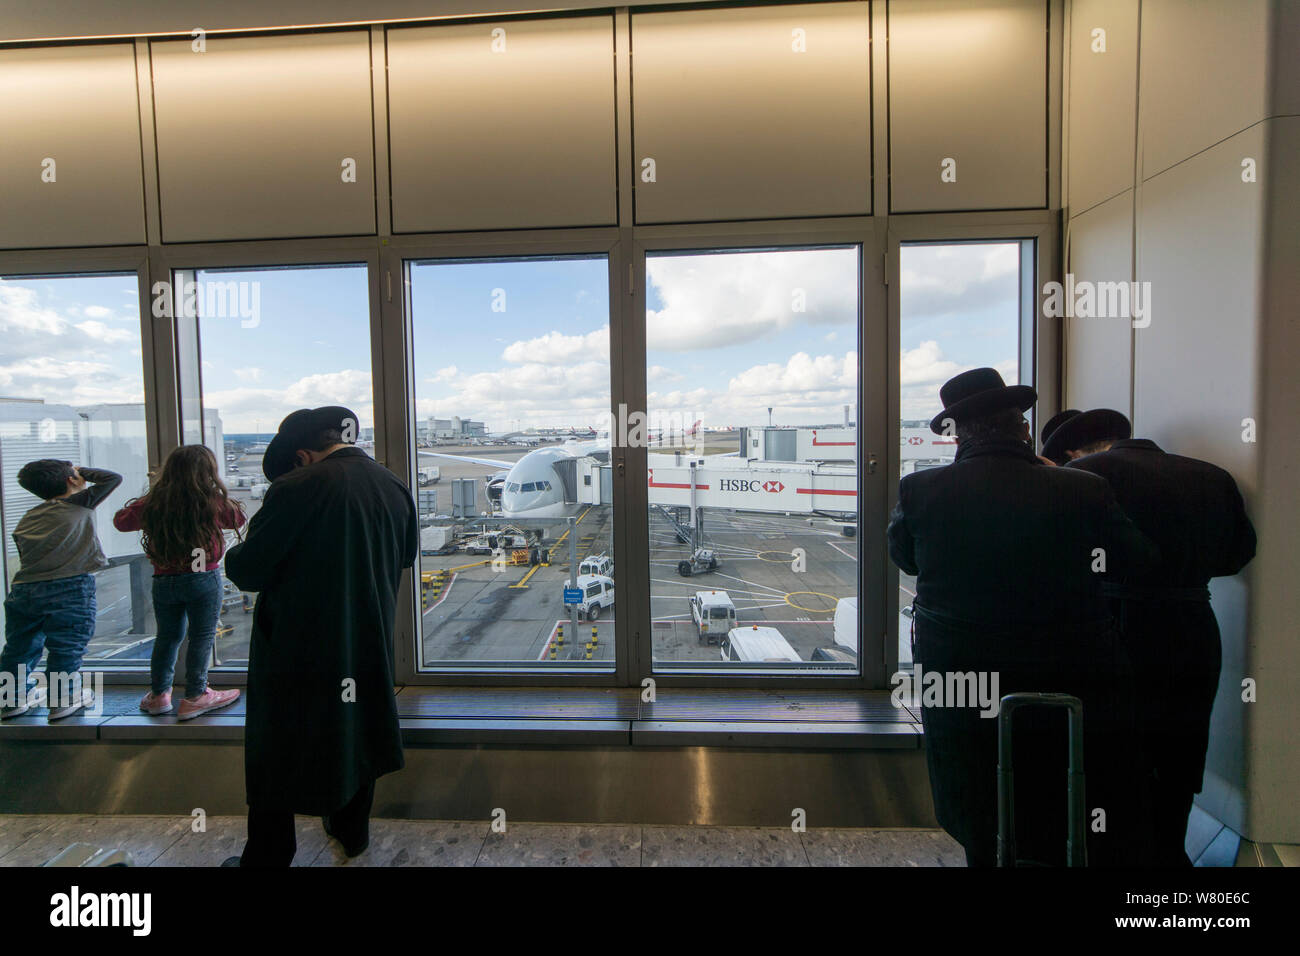 Heathrow Airport, London, United Kingdom. A group of Ultra-Orthodox ('Haredi') Jewish men pray while waiting for a flight. Stock Photo